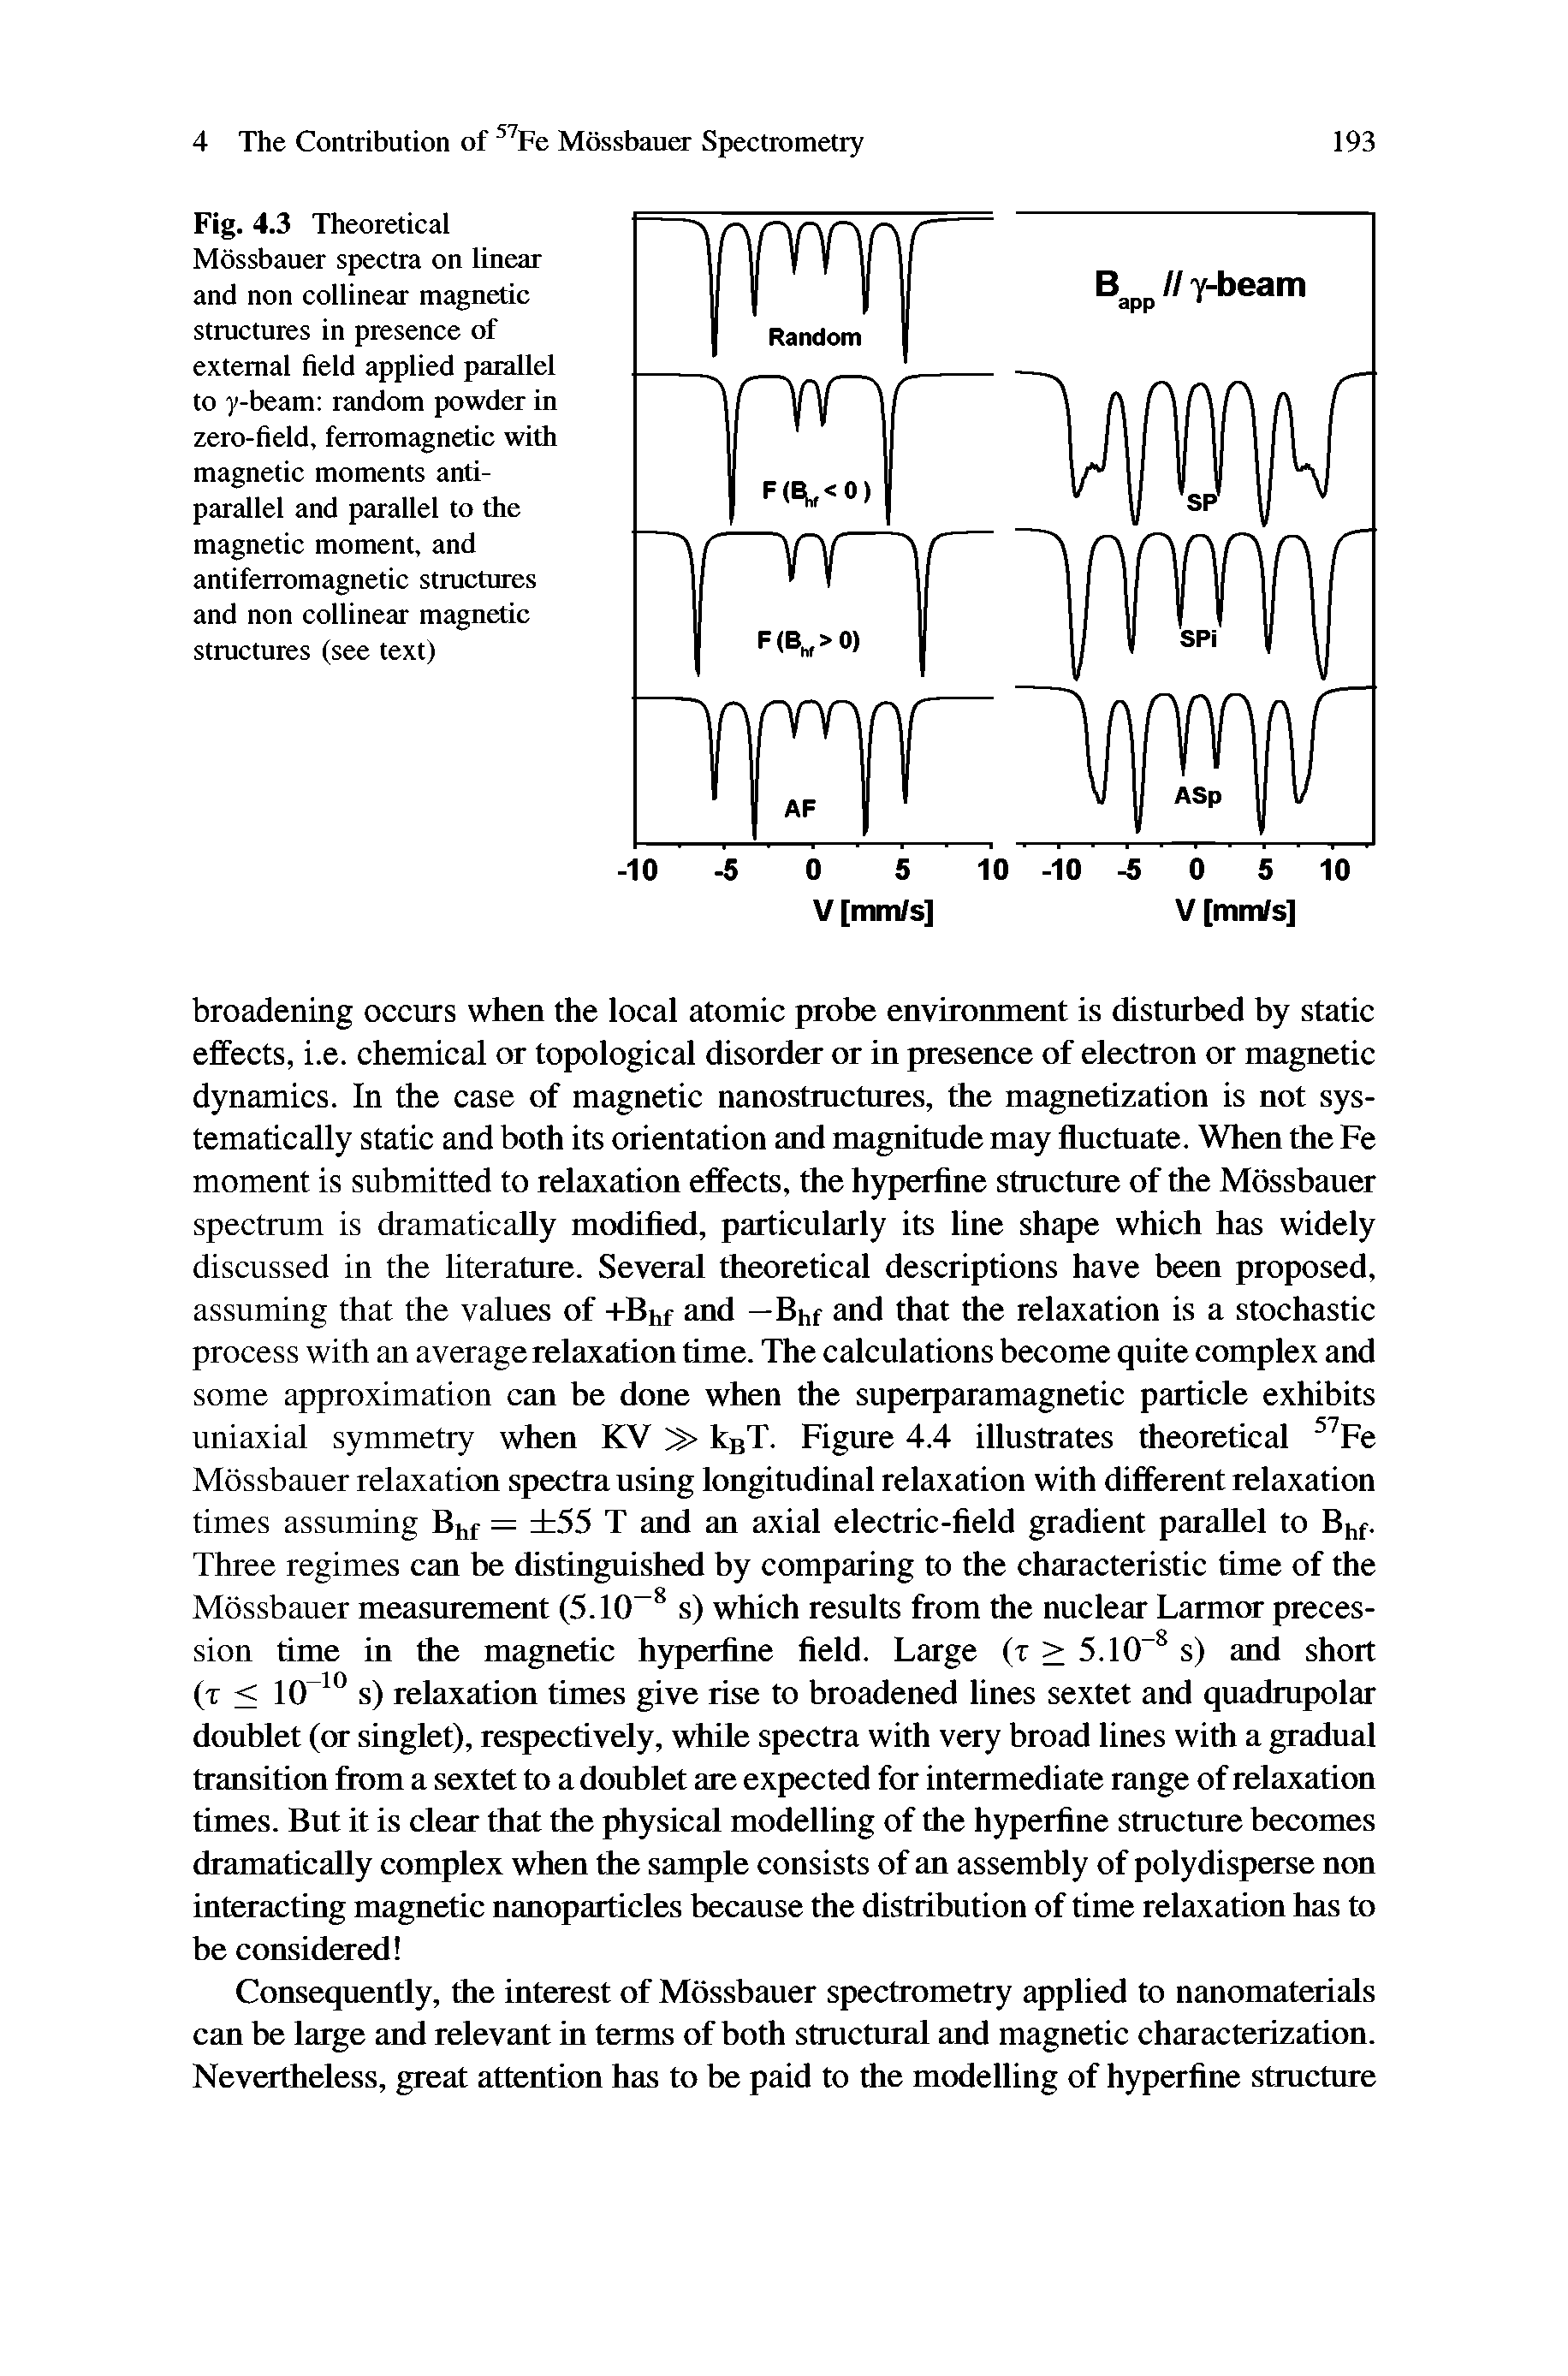 Fig. 4.3 Theoretical Mossbauer spectra on linear and non collinear magnetic structures in presence of external field applied parallel to y-beam random powder in zero-field, ferromagnetic with magnetic moments anti-parallel and parallel to the magnetic moment, and antiferromagnetic structures and non collinear magnetic structures (see text)...